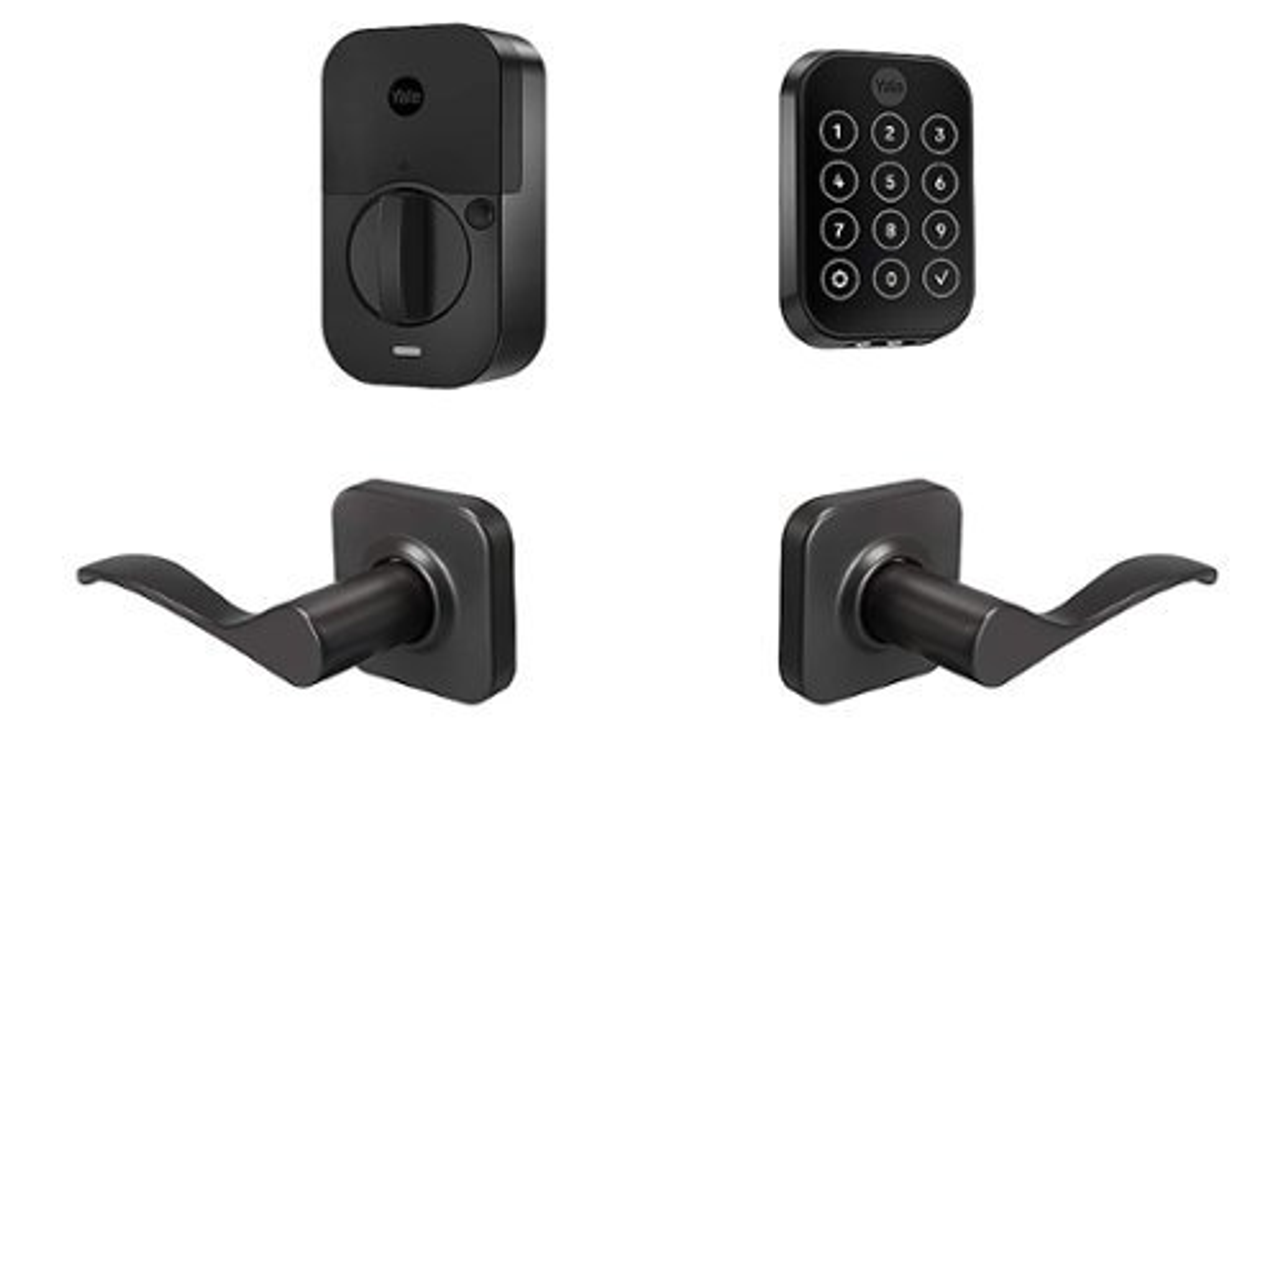 Yale - Assure 2 Norwood Lever Smart Lock Wi-Fi Replacement Deadbolt with Touchscreen and App Access - Black Suede